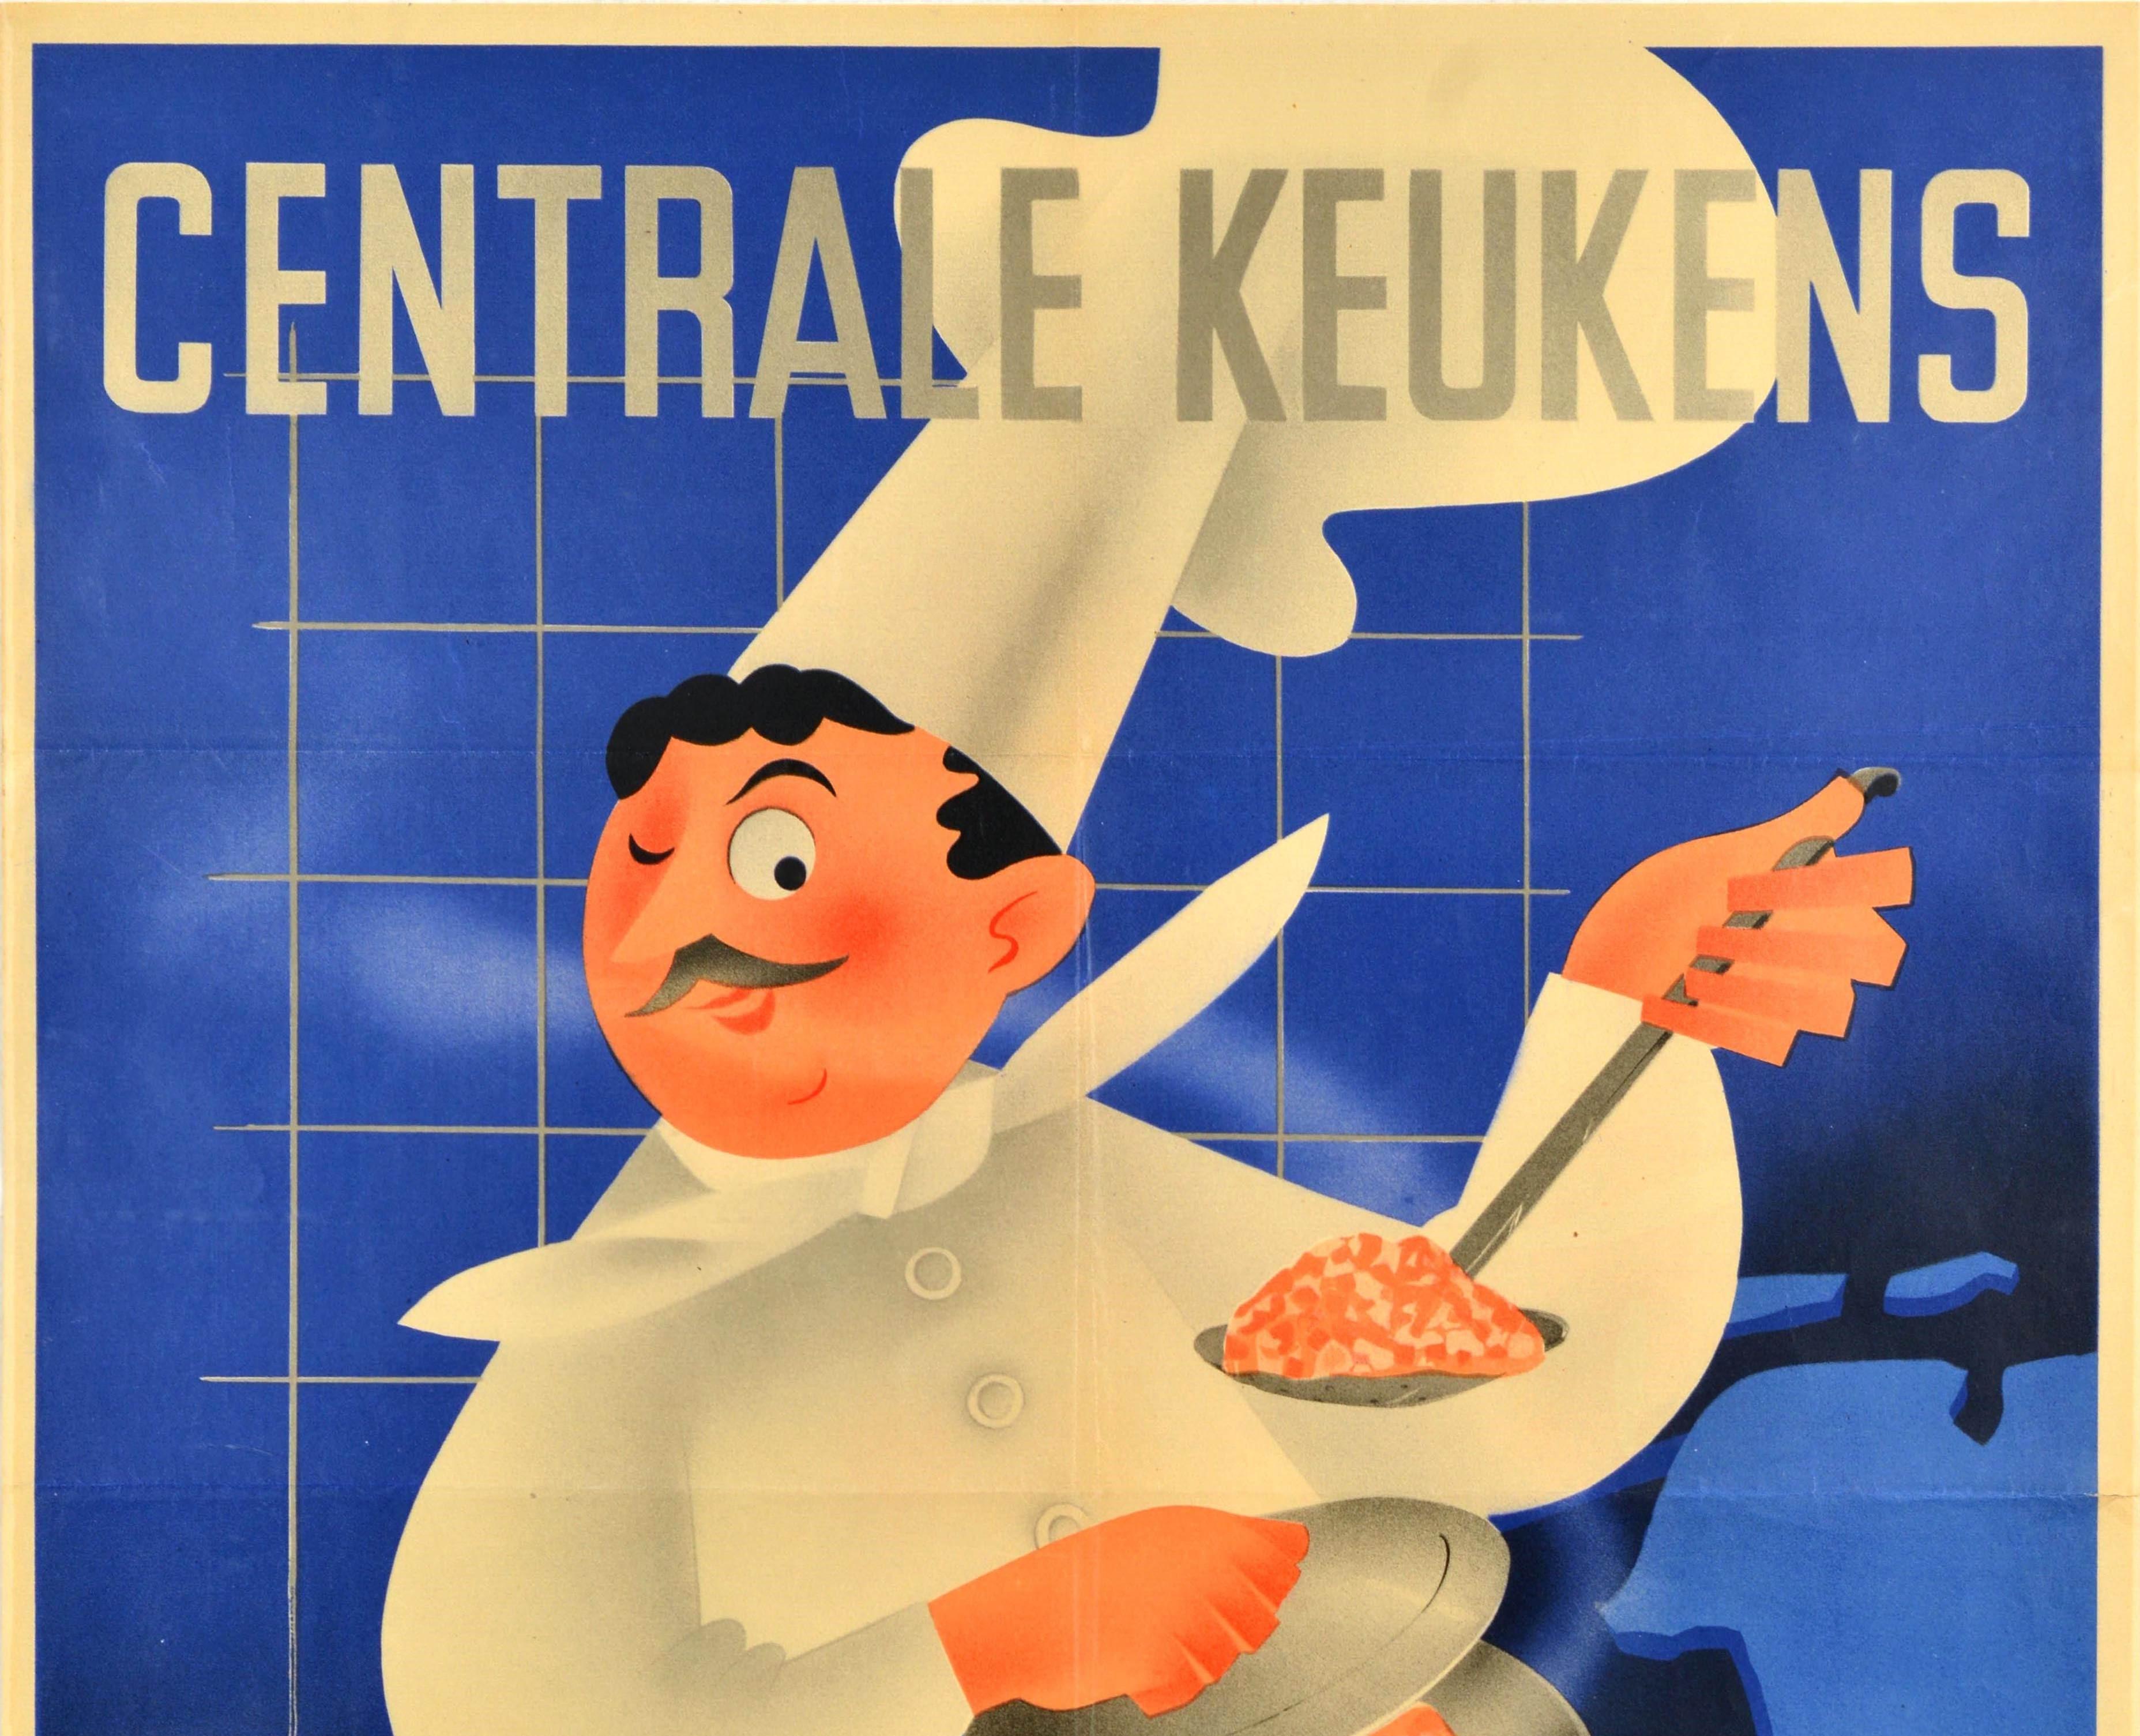 Original Vintage WWII Poster Central Kitchens War Food Centrale Keukens Map Chef - Print by Joop Geesink